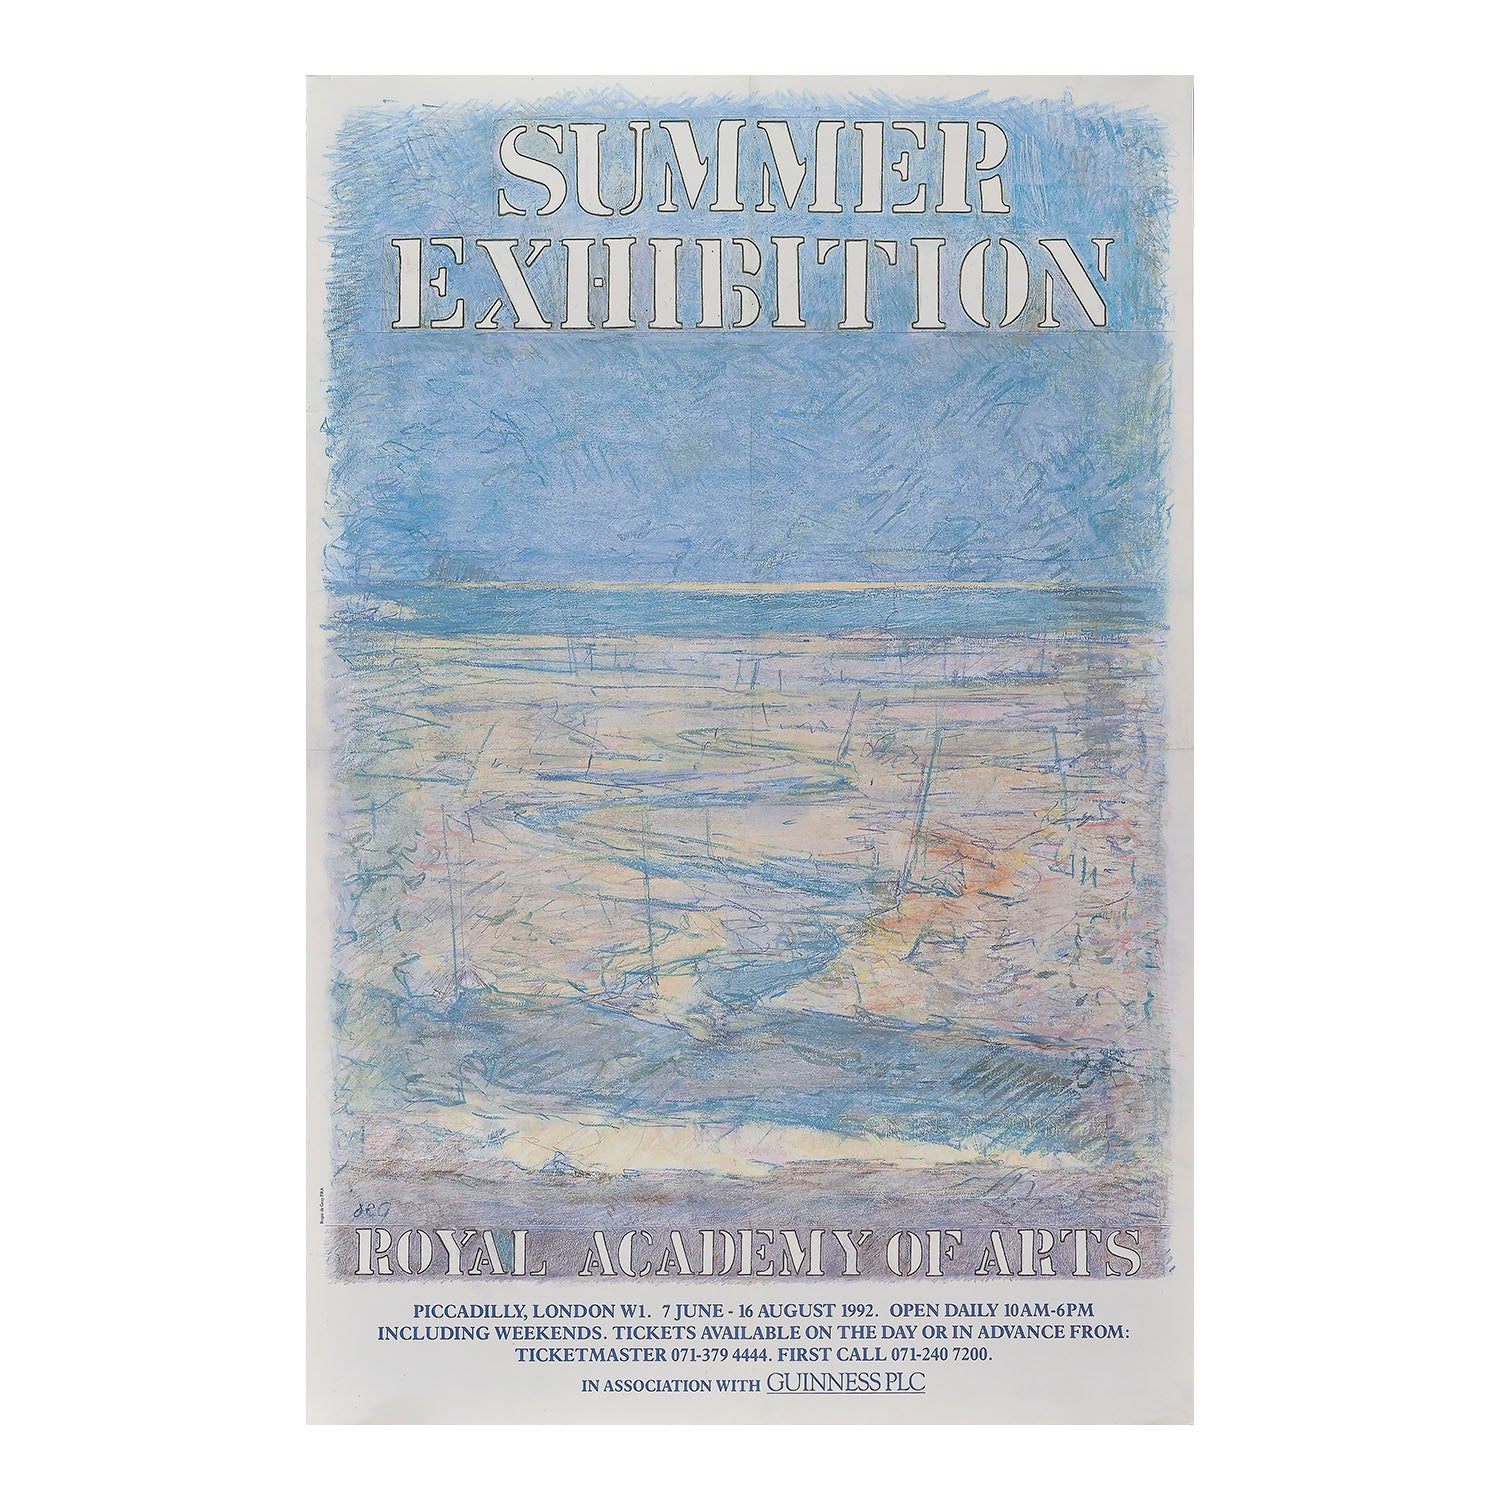 original poster, for the Royal Academy Summer Exhibition in 1992 painted specifically for the exhibition by the Academy’s President Sir Roger de Grey (1918-1995). 